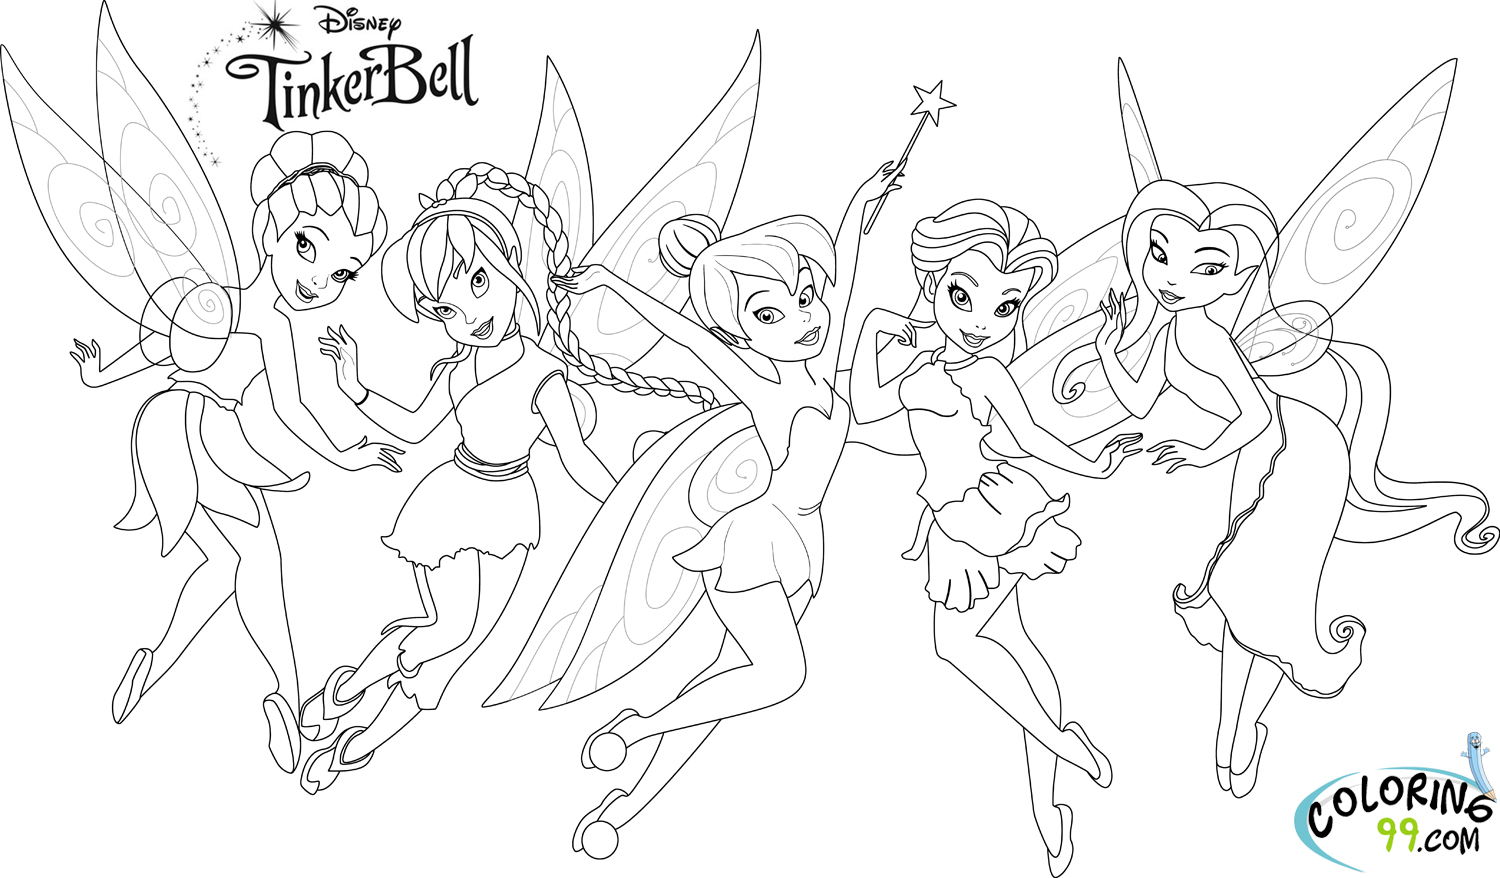 Tinkerbell and friends coloring pages team colors